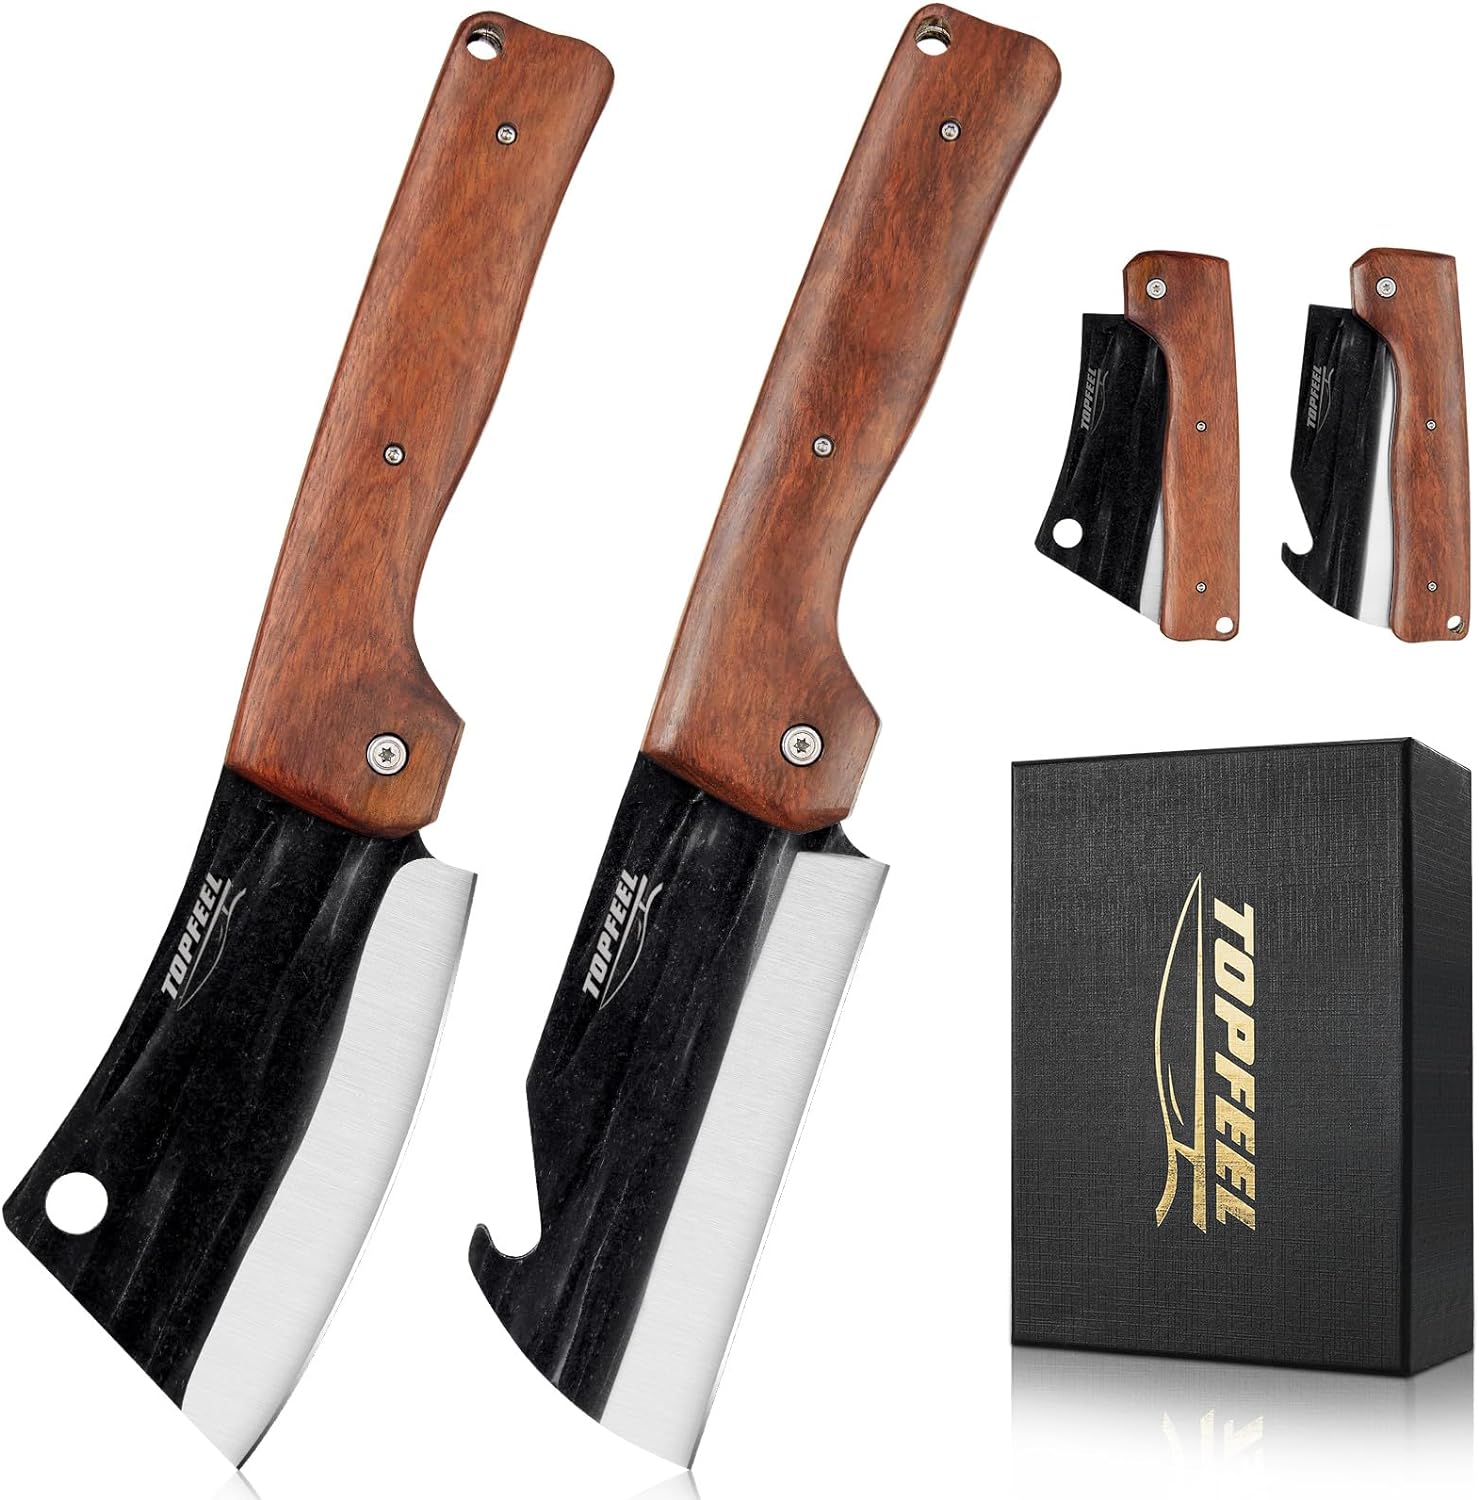 Topfeel 2PCS Folding Knife with Pocket Clip, Pocket Knife Mens Gift knife set, Hand Forged Sharp Chef Knife Set for Outdoor Sports Camping BBQ,Hunting,Fishing or Home